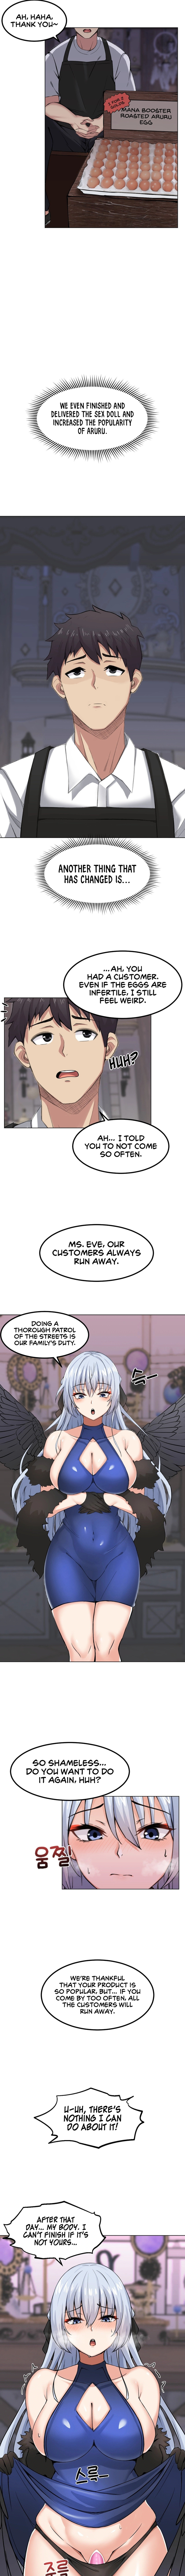 Meat Doll Workshop in Another World - Chapter 5 Page 15